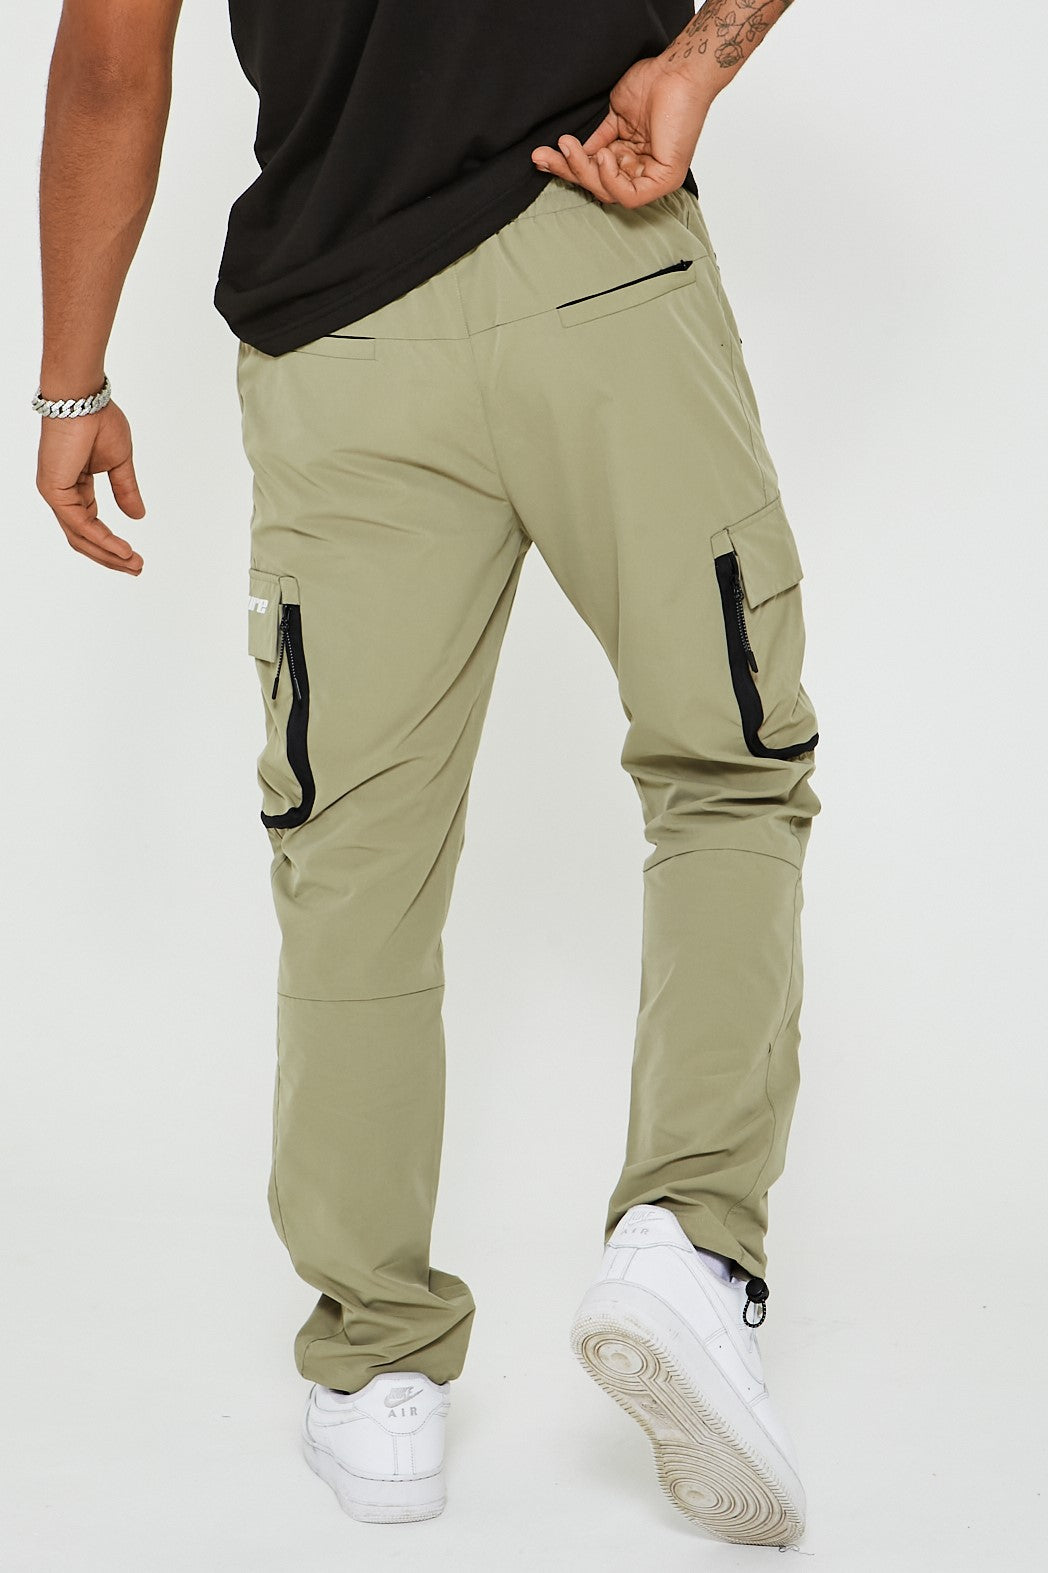 Mens Woven Cargo Pants, Tapered Fit Elasticated Waist Toggle Cuffs ...